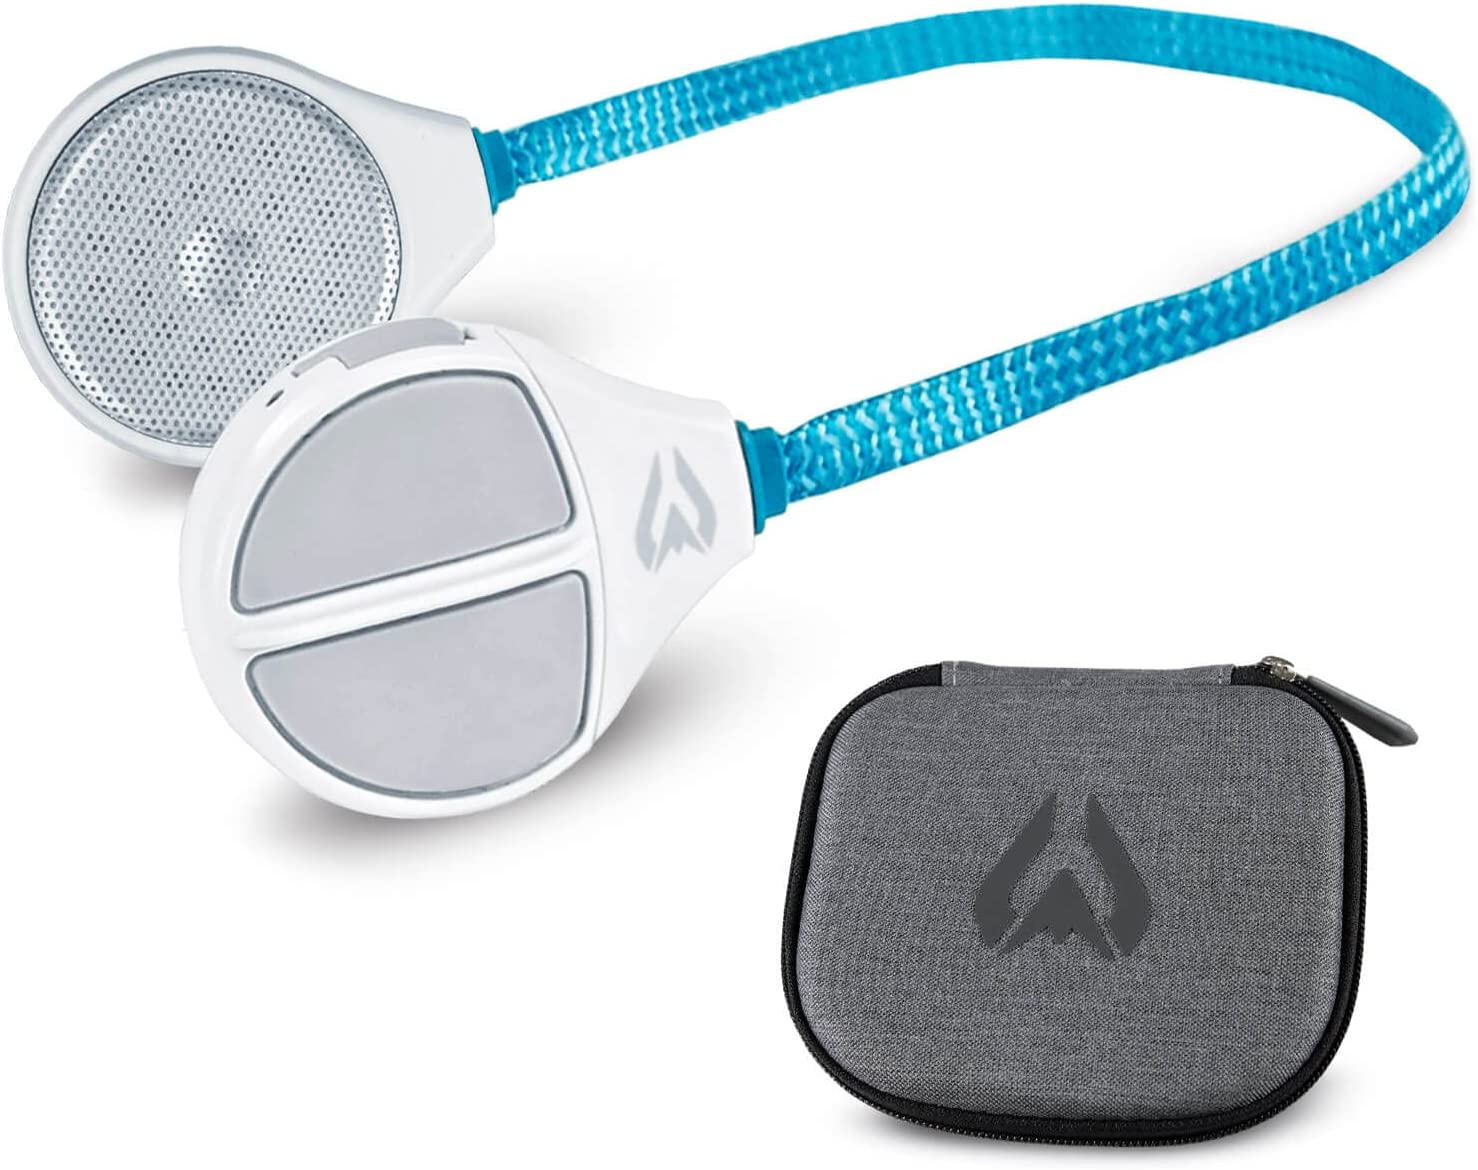 Wildhorn Alta Wireless Bluetooth Helmet Drop in Headphones- HD Speakers Compatible Any Audio Ready Ski/Snowboard Helmet - 3 Button Glove Friendly Controls Microphone for Hands Free Calls, White/Blue